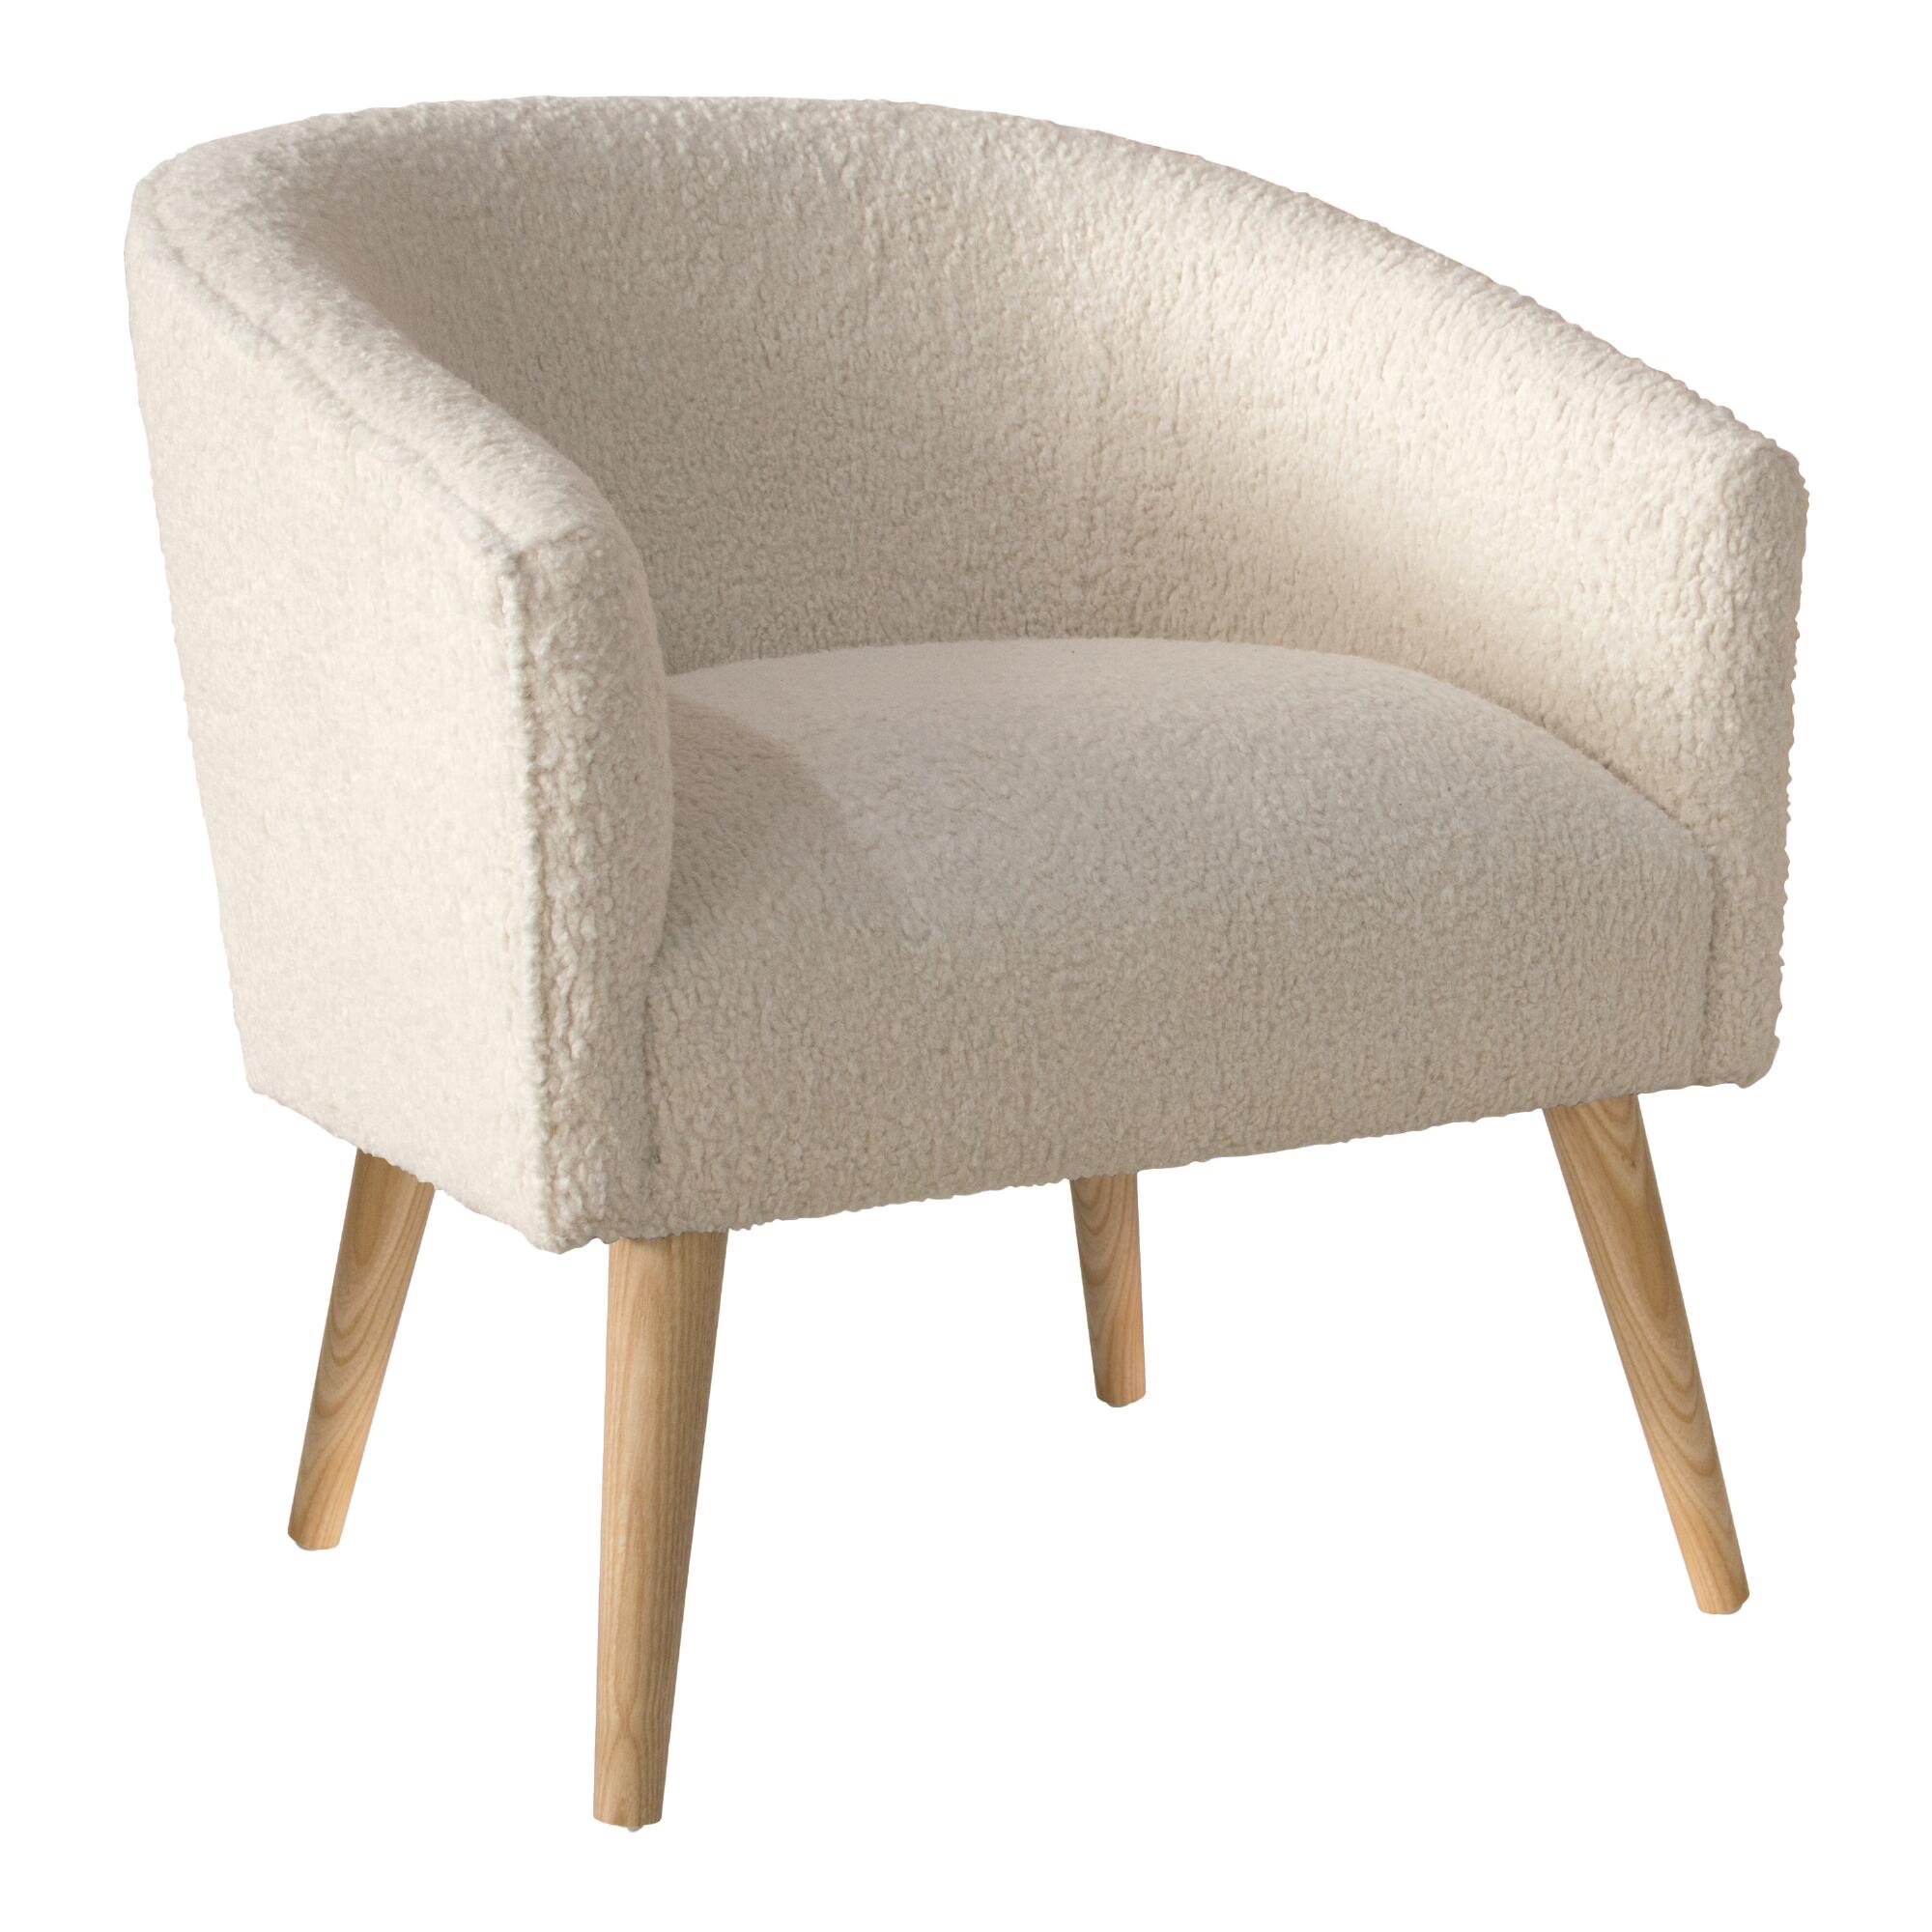 Faux Sheepskin Ilana Upholstered Chair: Natural by World Market